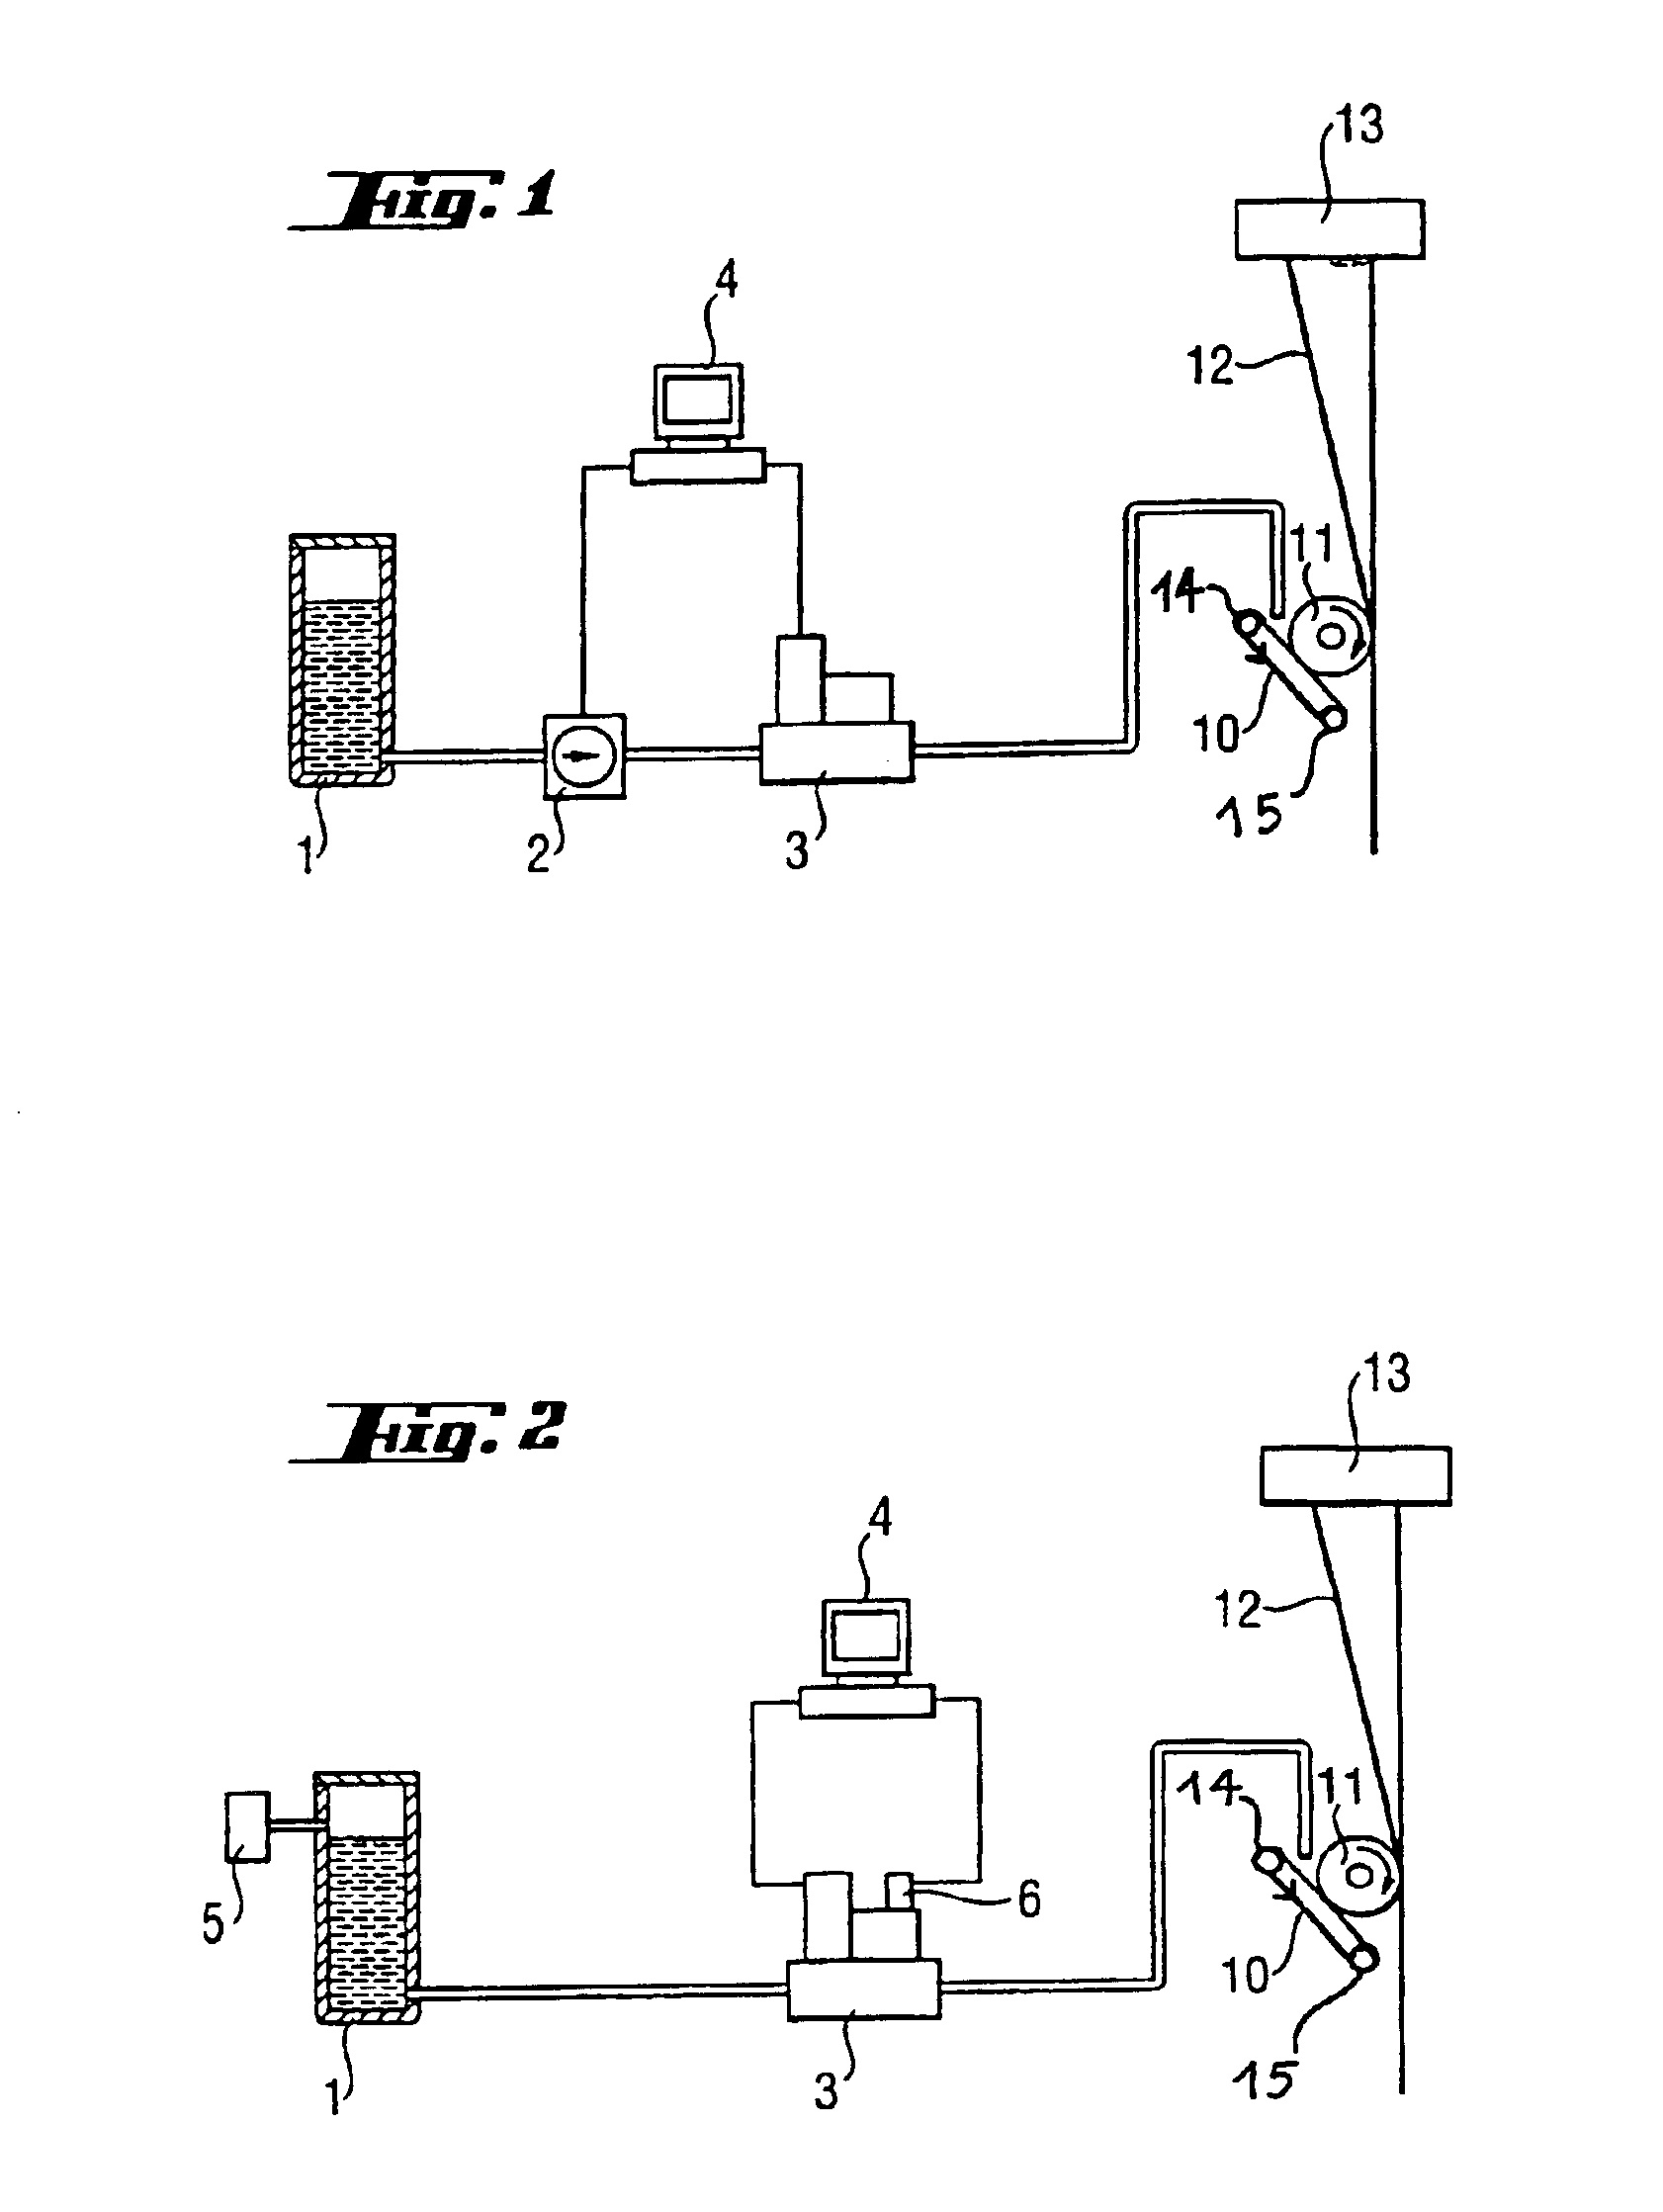 Method for making yarn and products comprising same